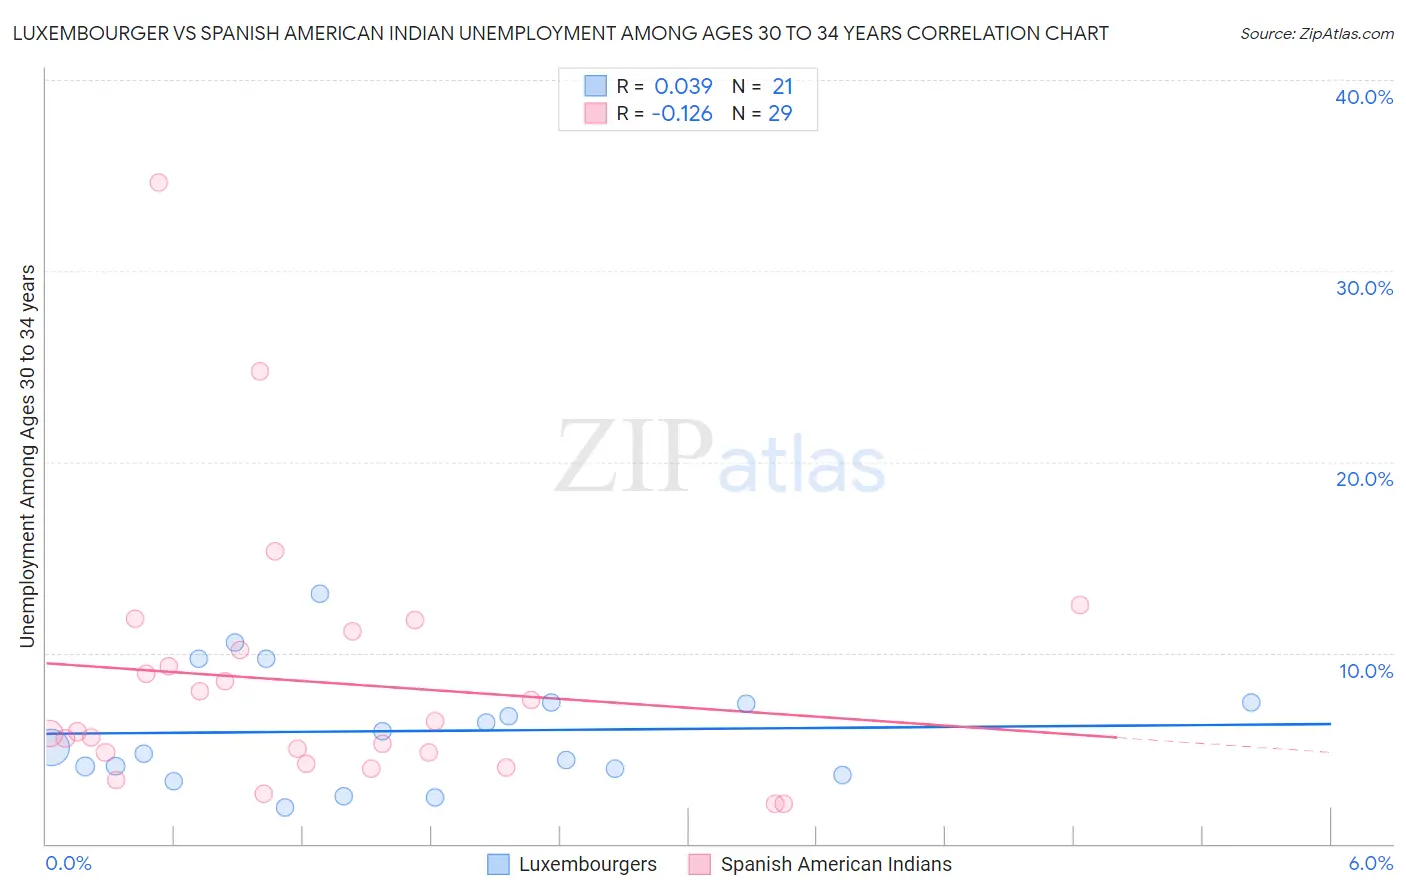 Luxembourger vs Spanish American Indian Unemployment Among Ages 30 to 34 years